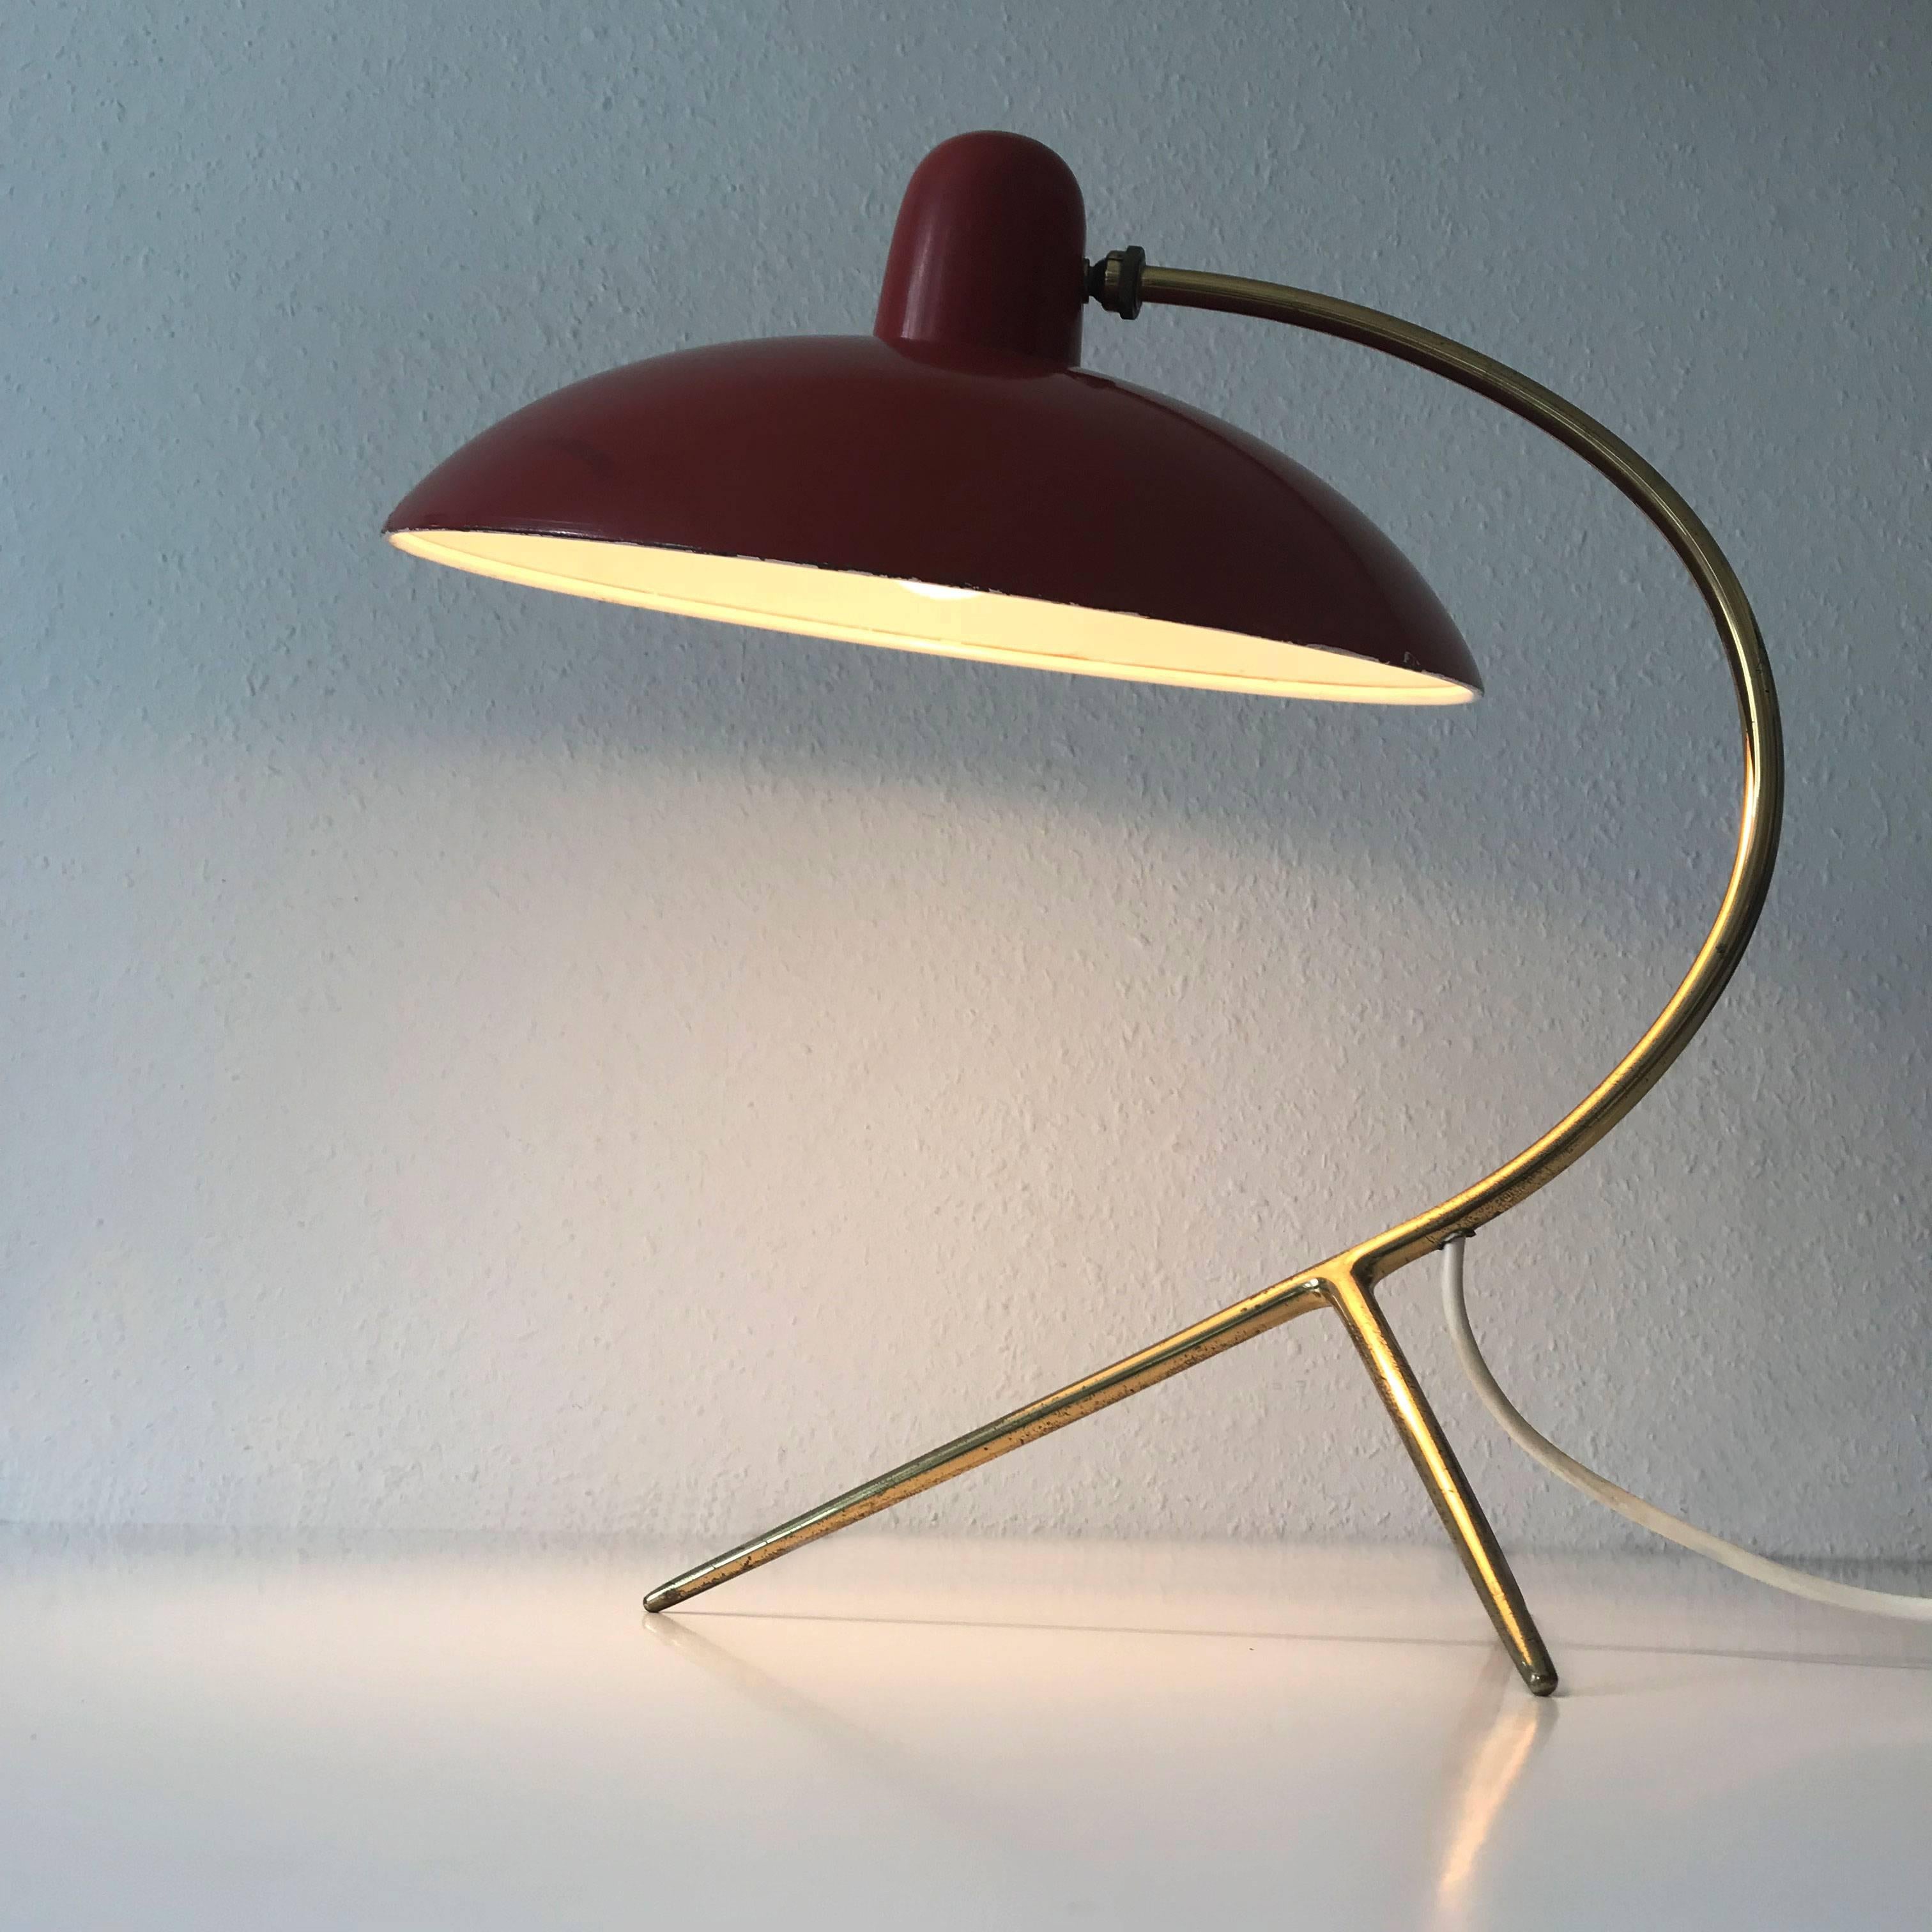 Exceptional Italian Mid-Century Modern Table Lamp, 1950s 2